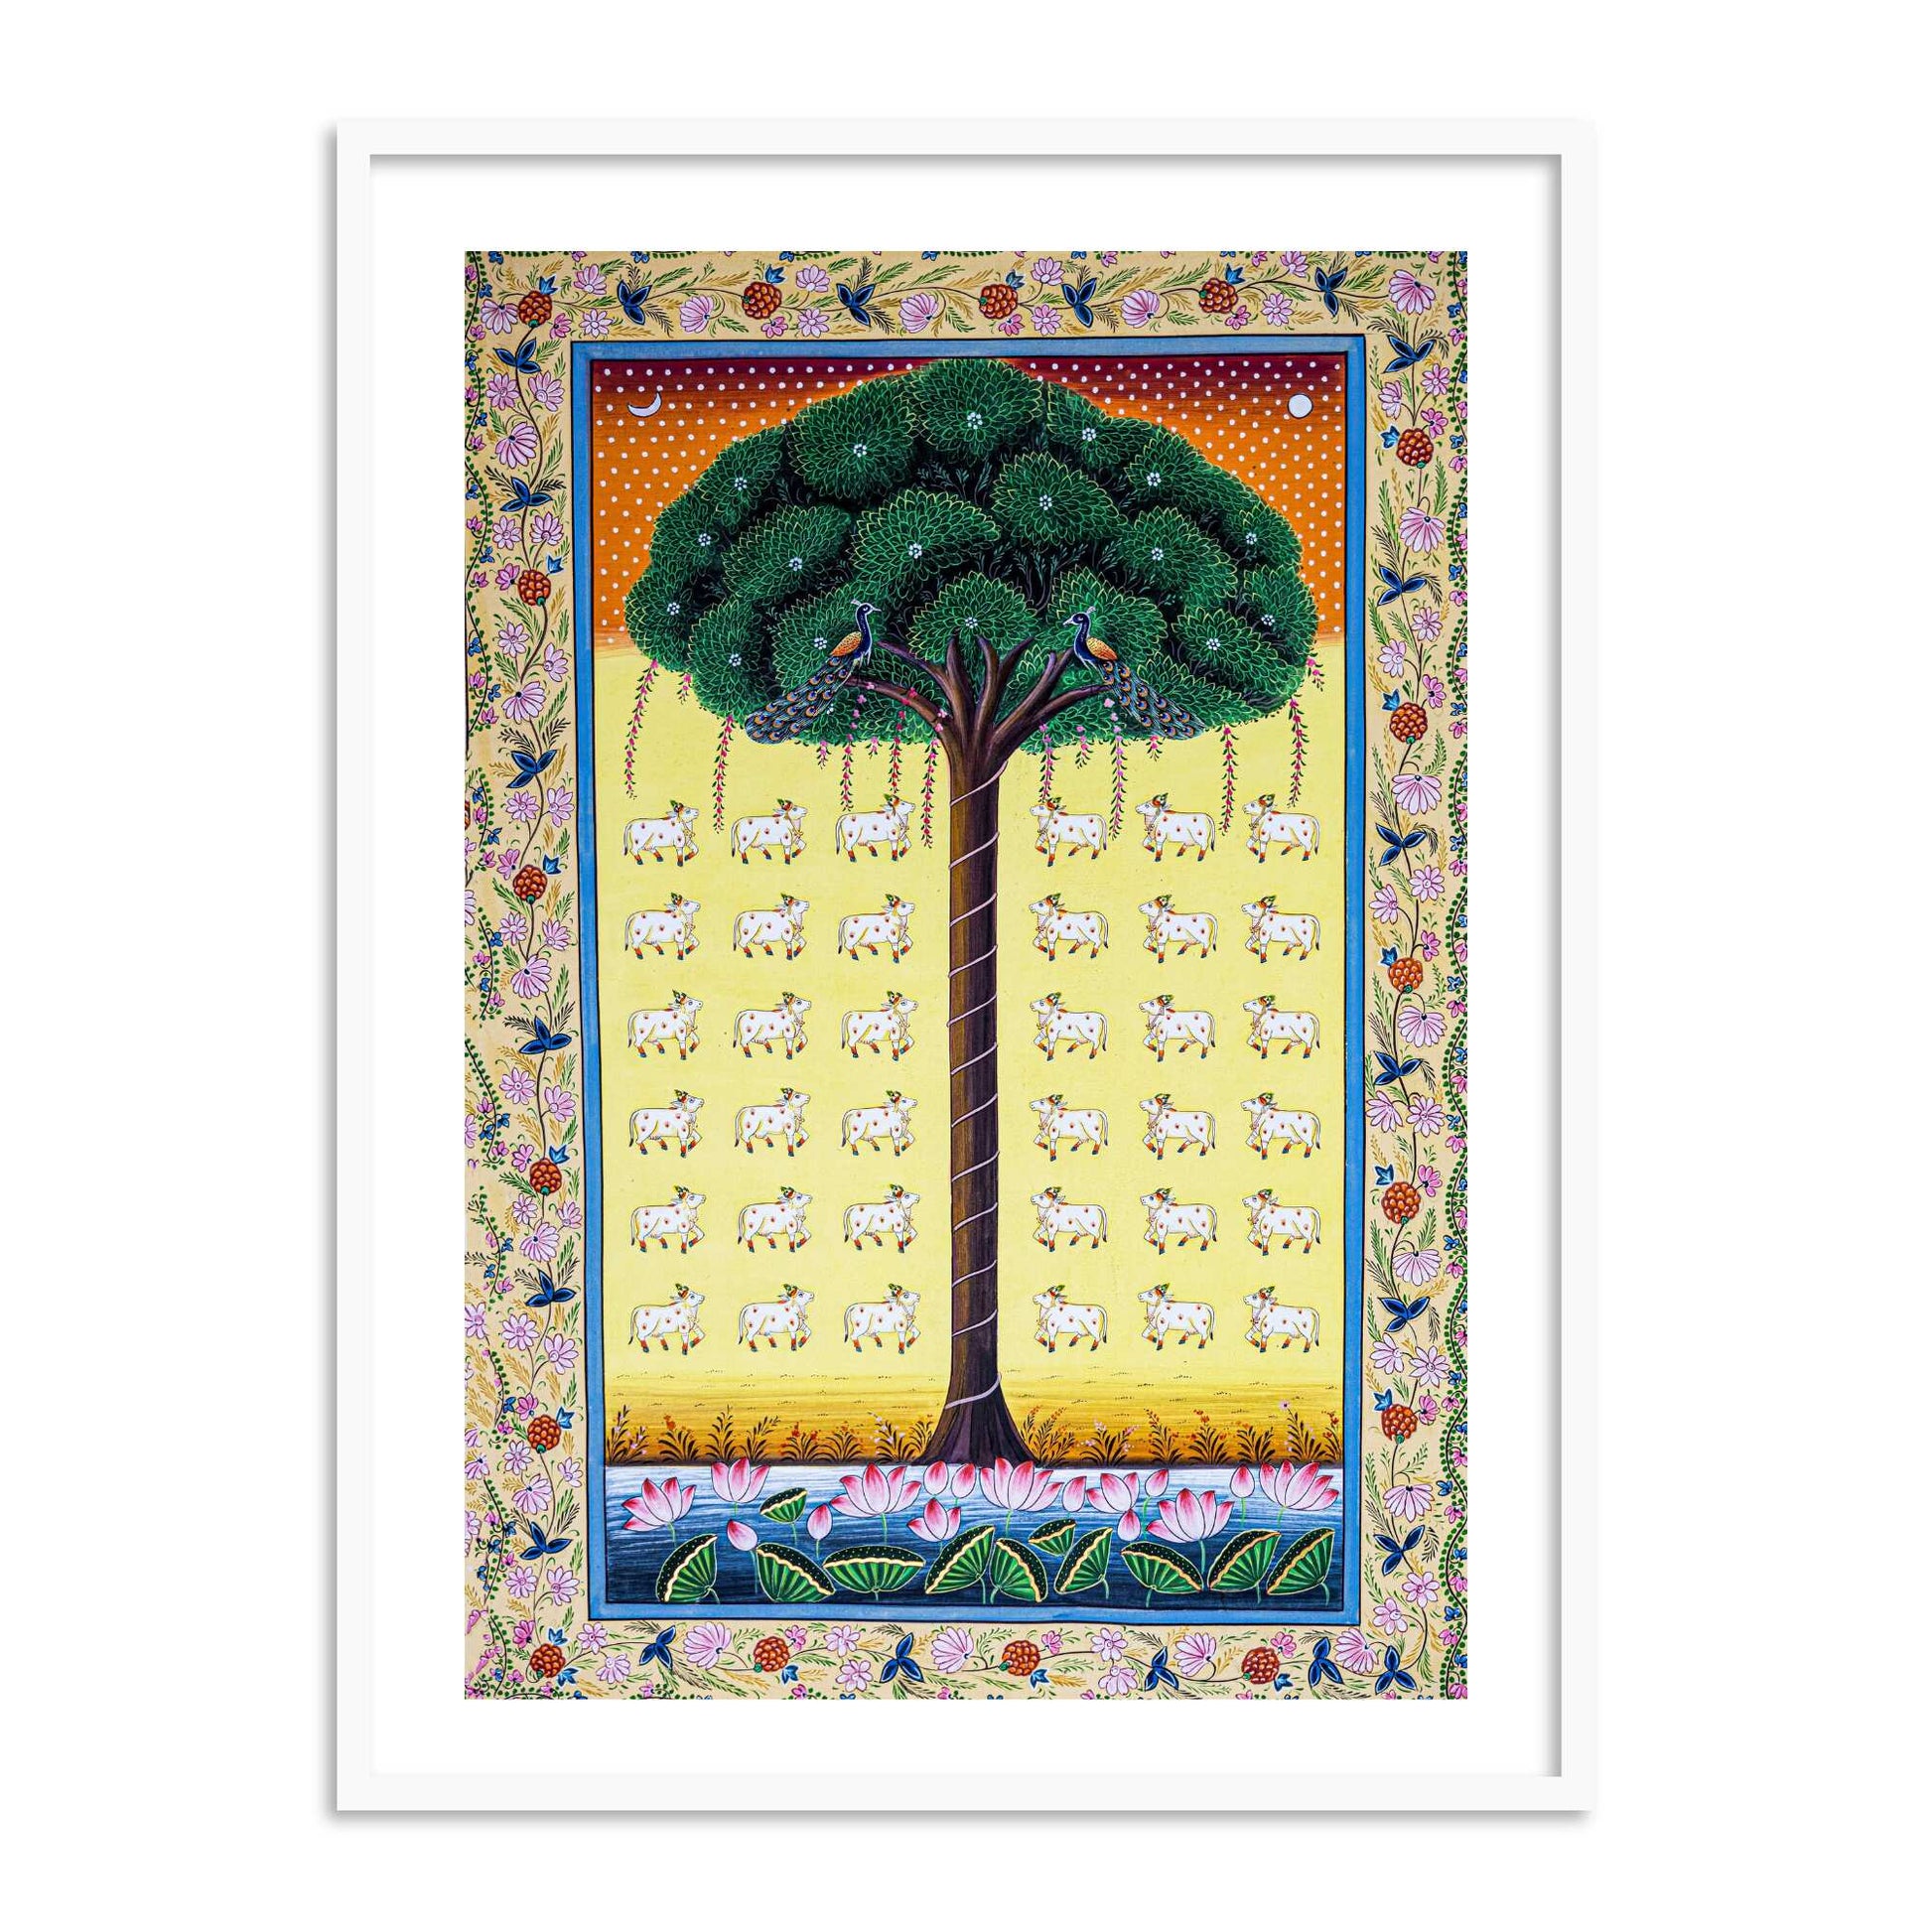 Buy Online Pichwai Tree of Life Pichwai Painting | Phad Indian Art for Wall Decor